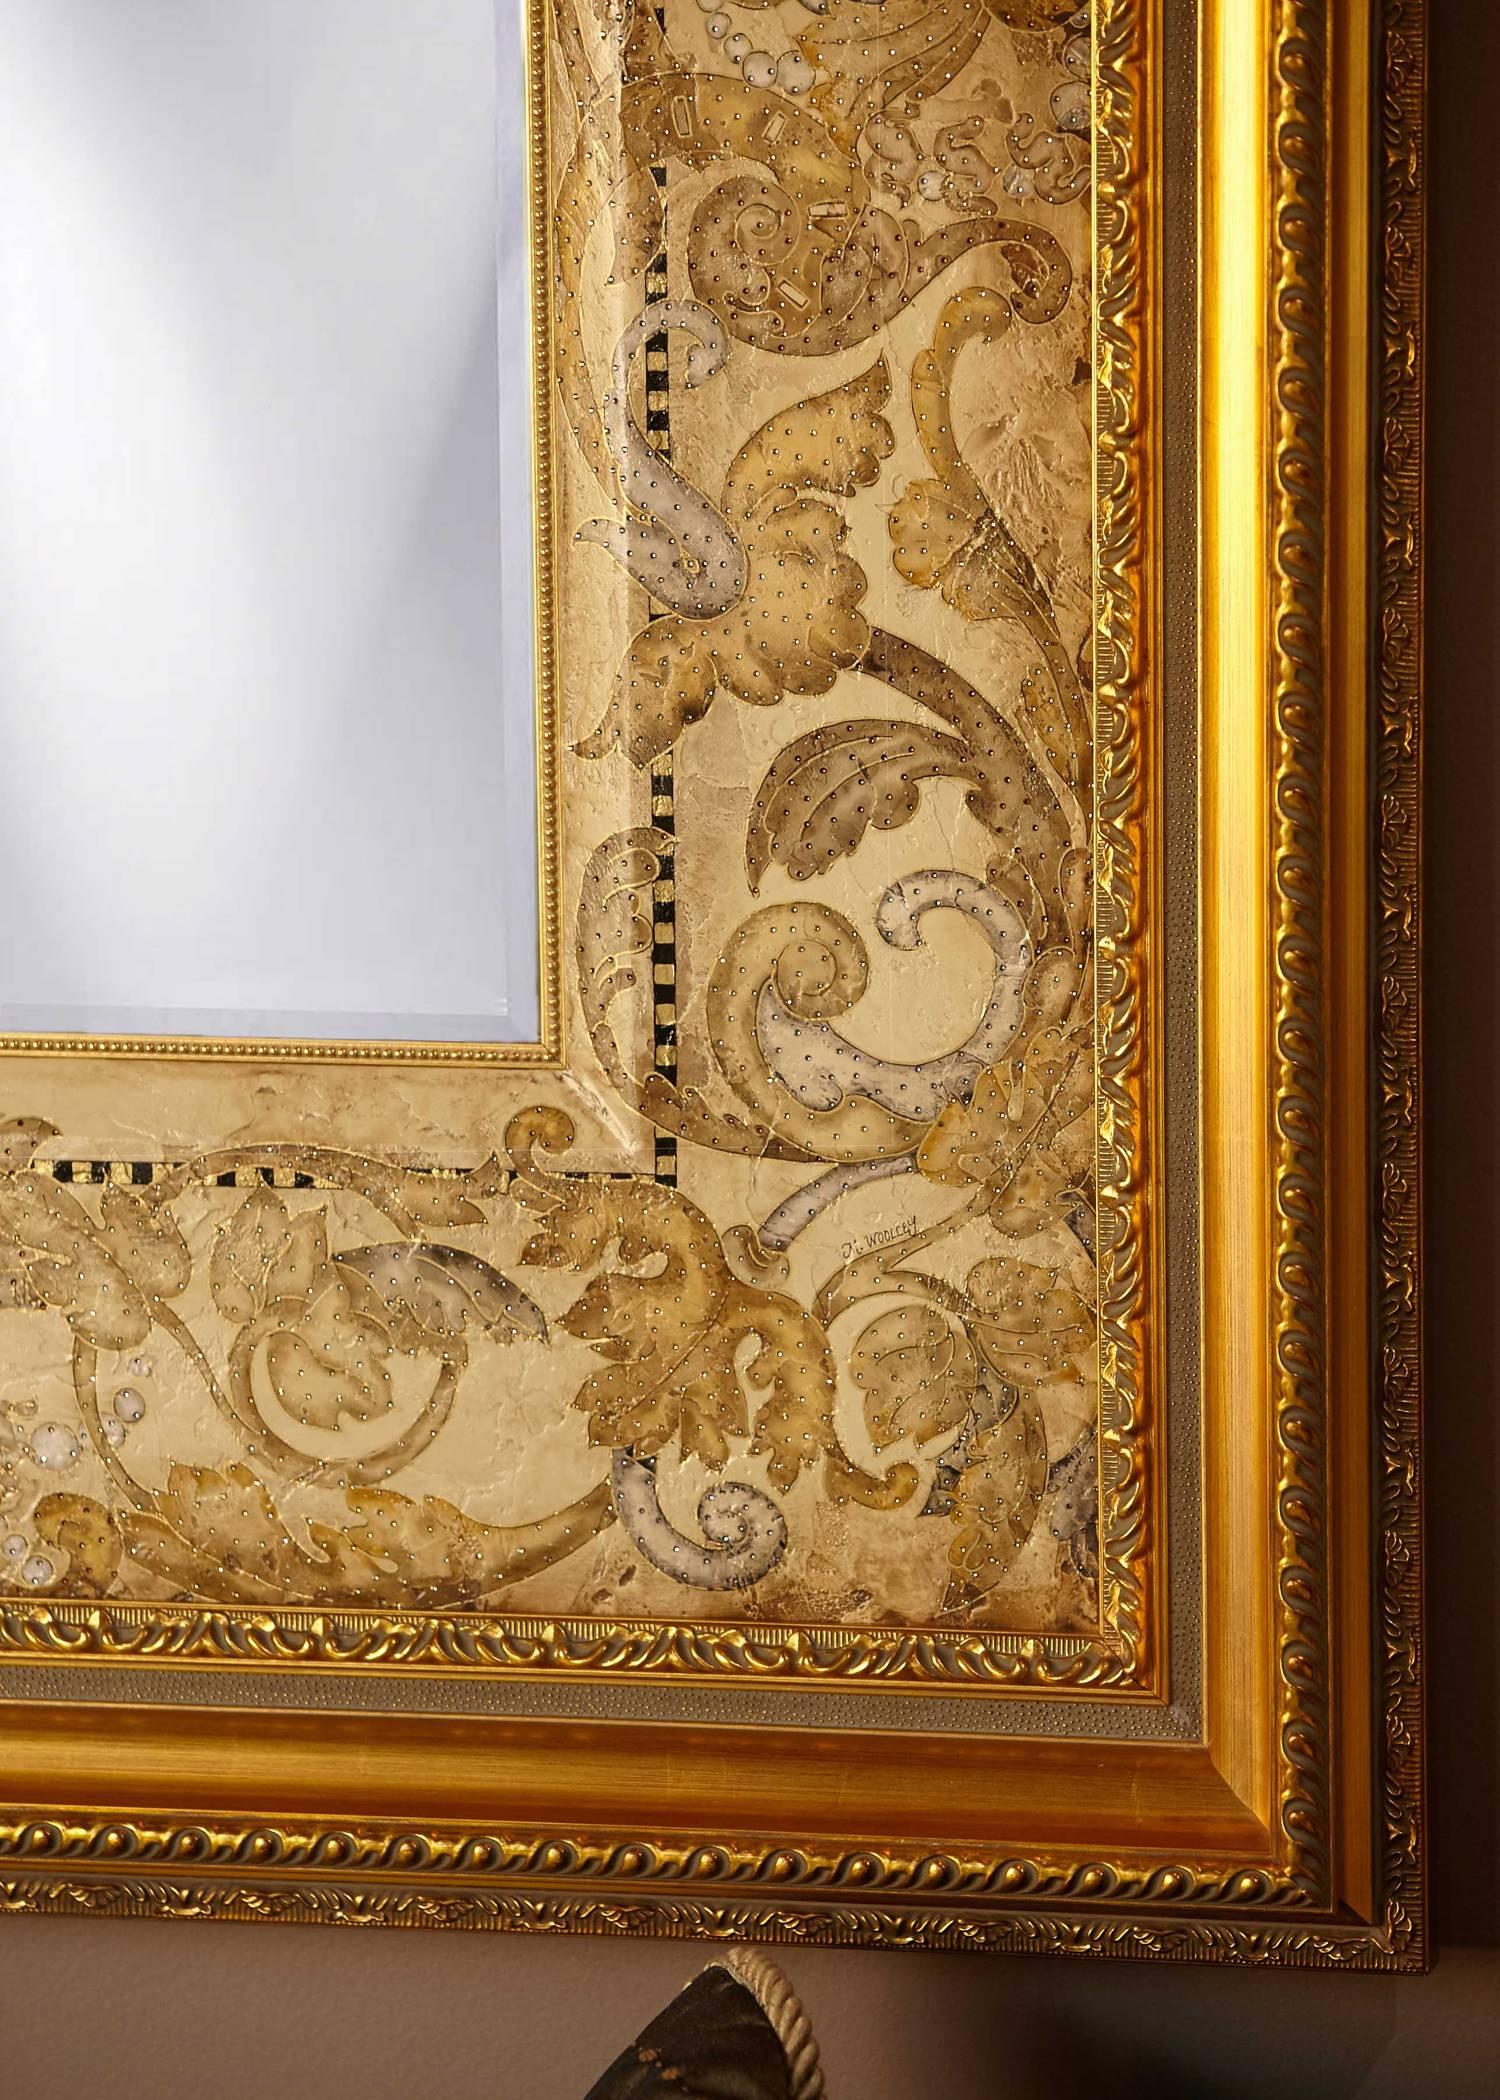 This is a hand-painted and embellished large-scale mirror by Michelle Woolley Sauter. It has a 1.5